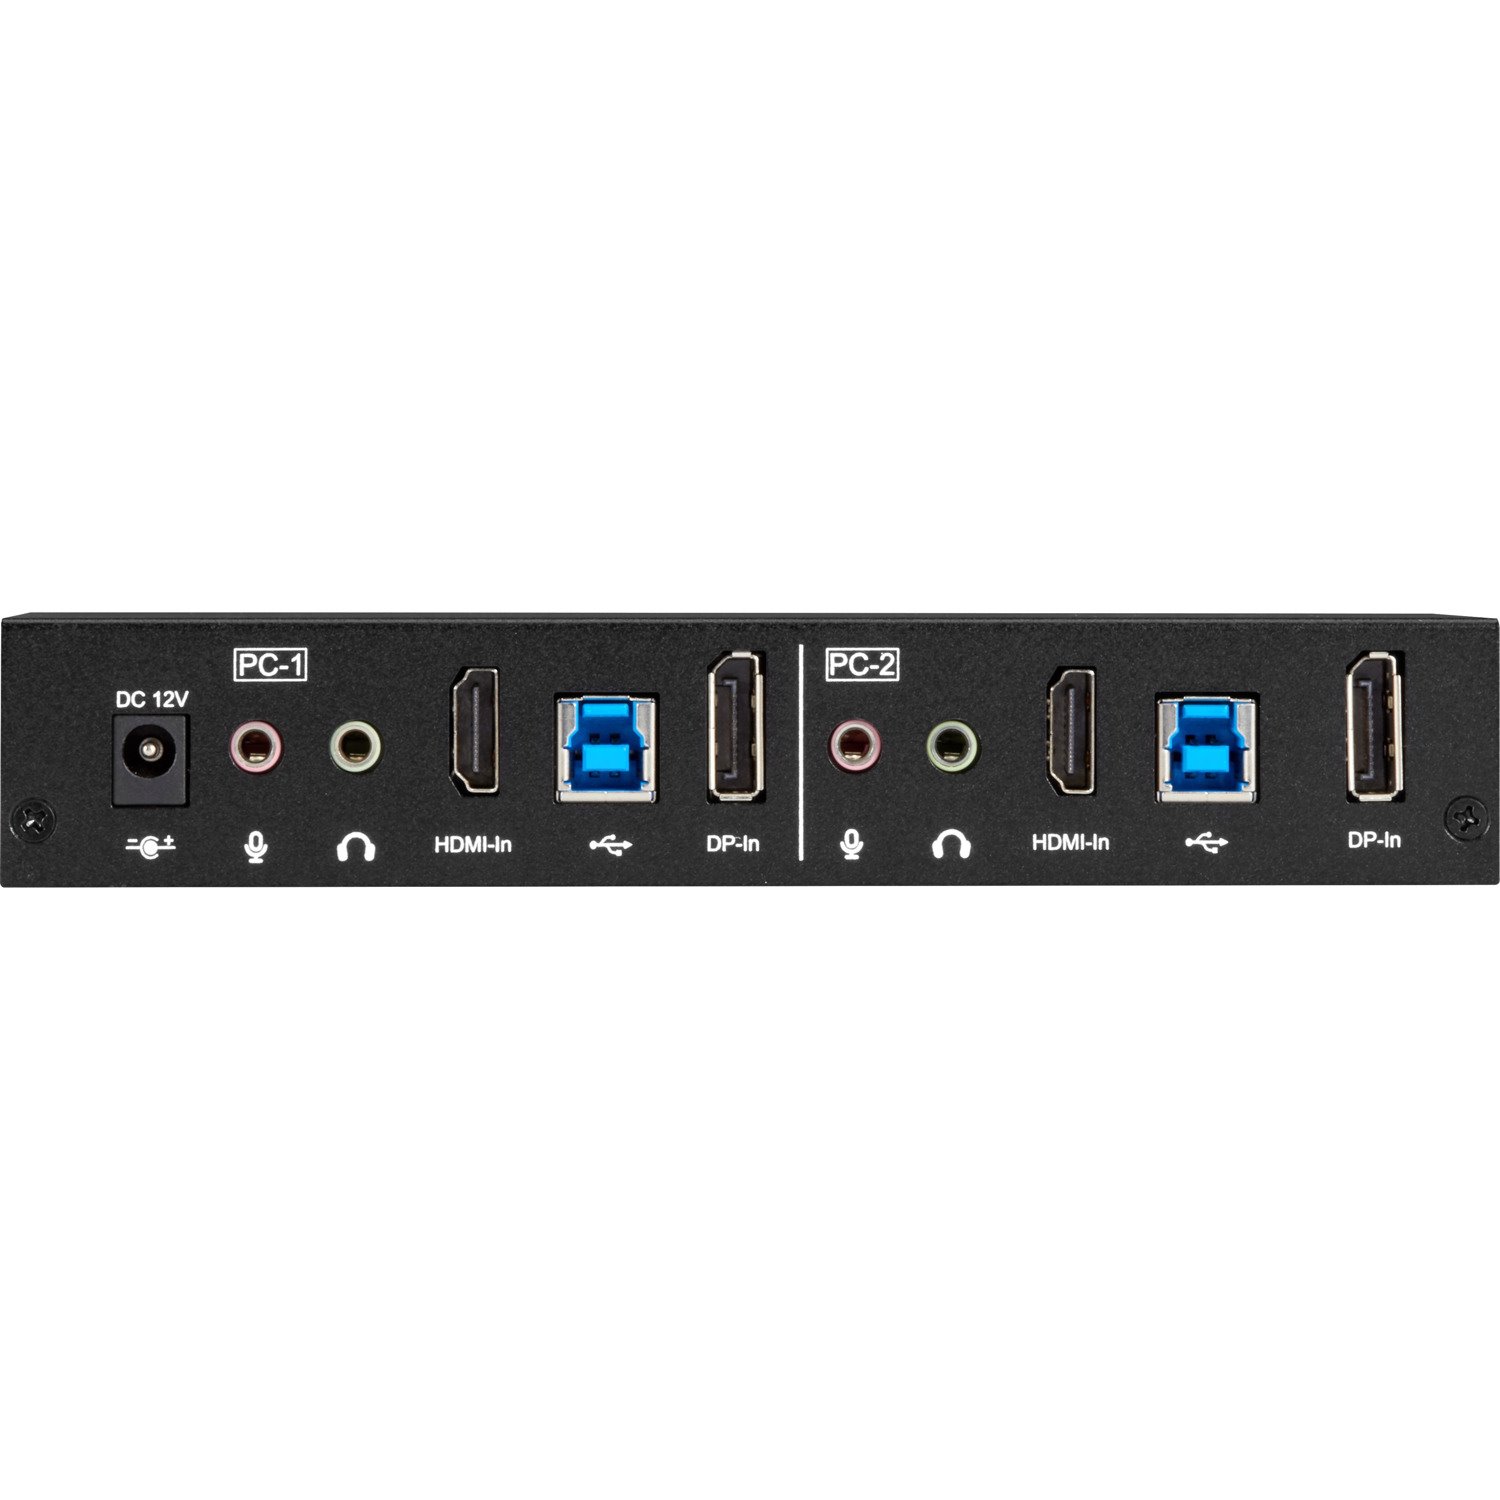 Black Box 2-Port 4K HDMI Dual-Head KVM Switch (with Audio Line In/Out and USB Hub)